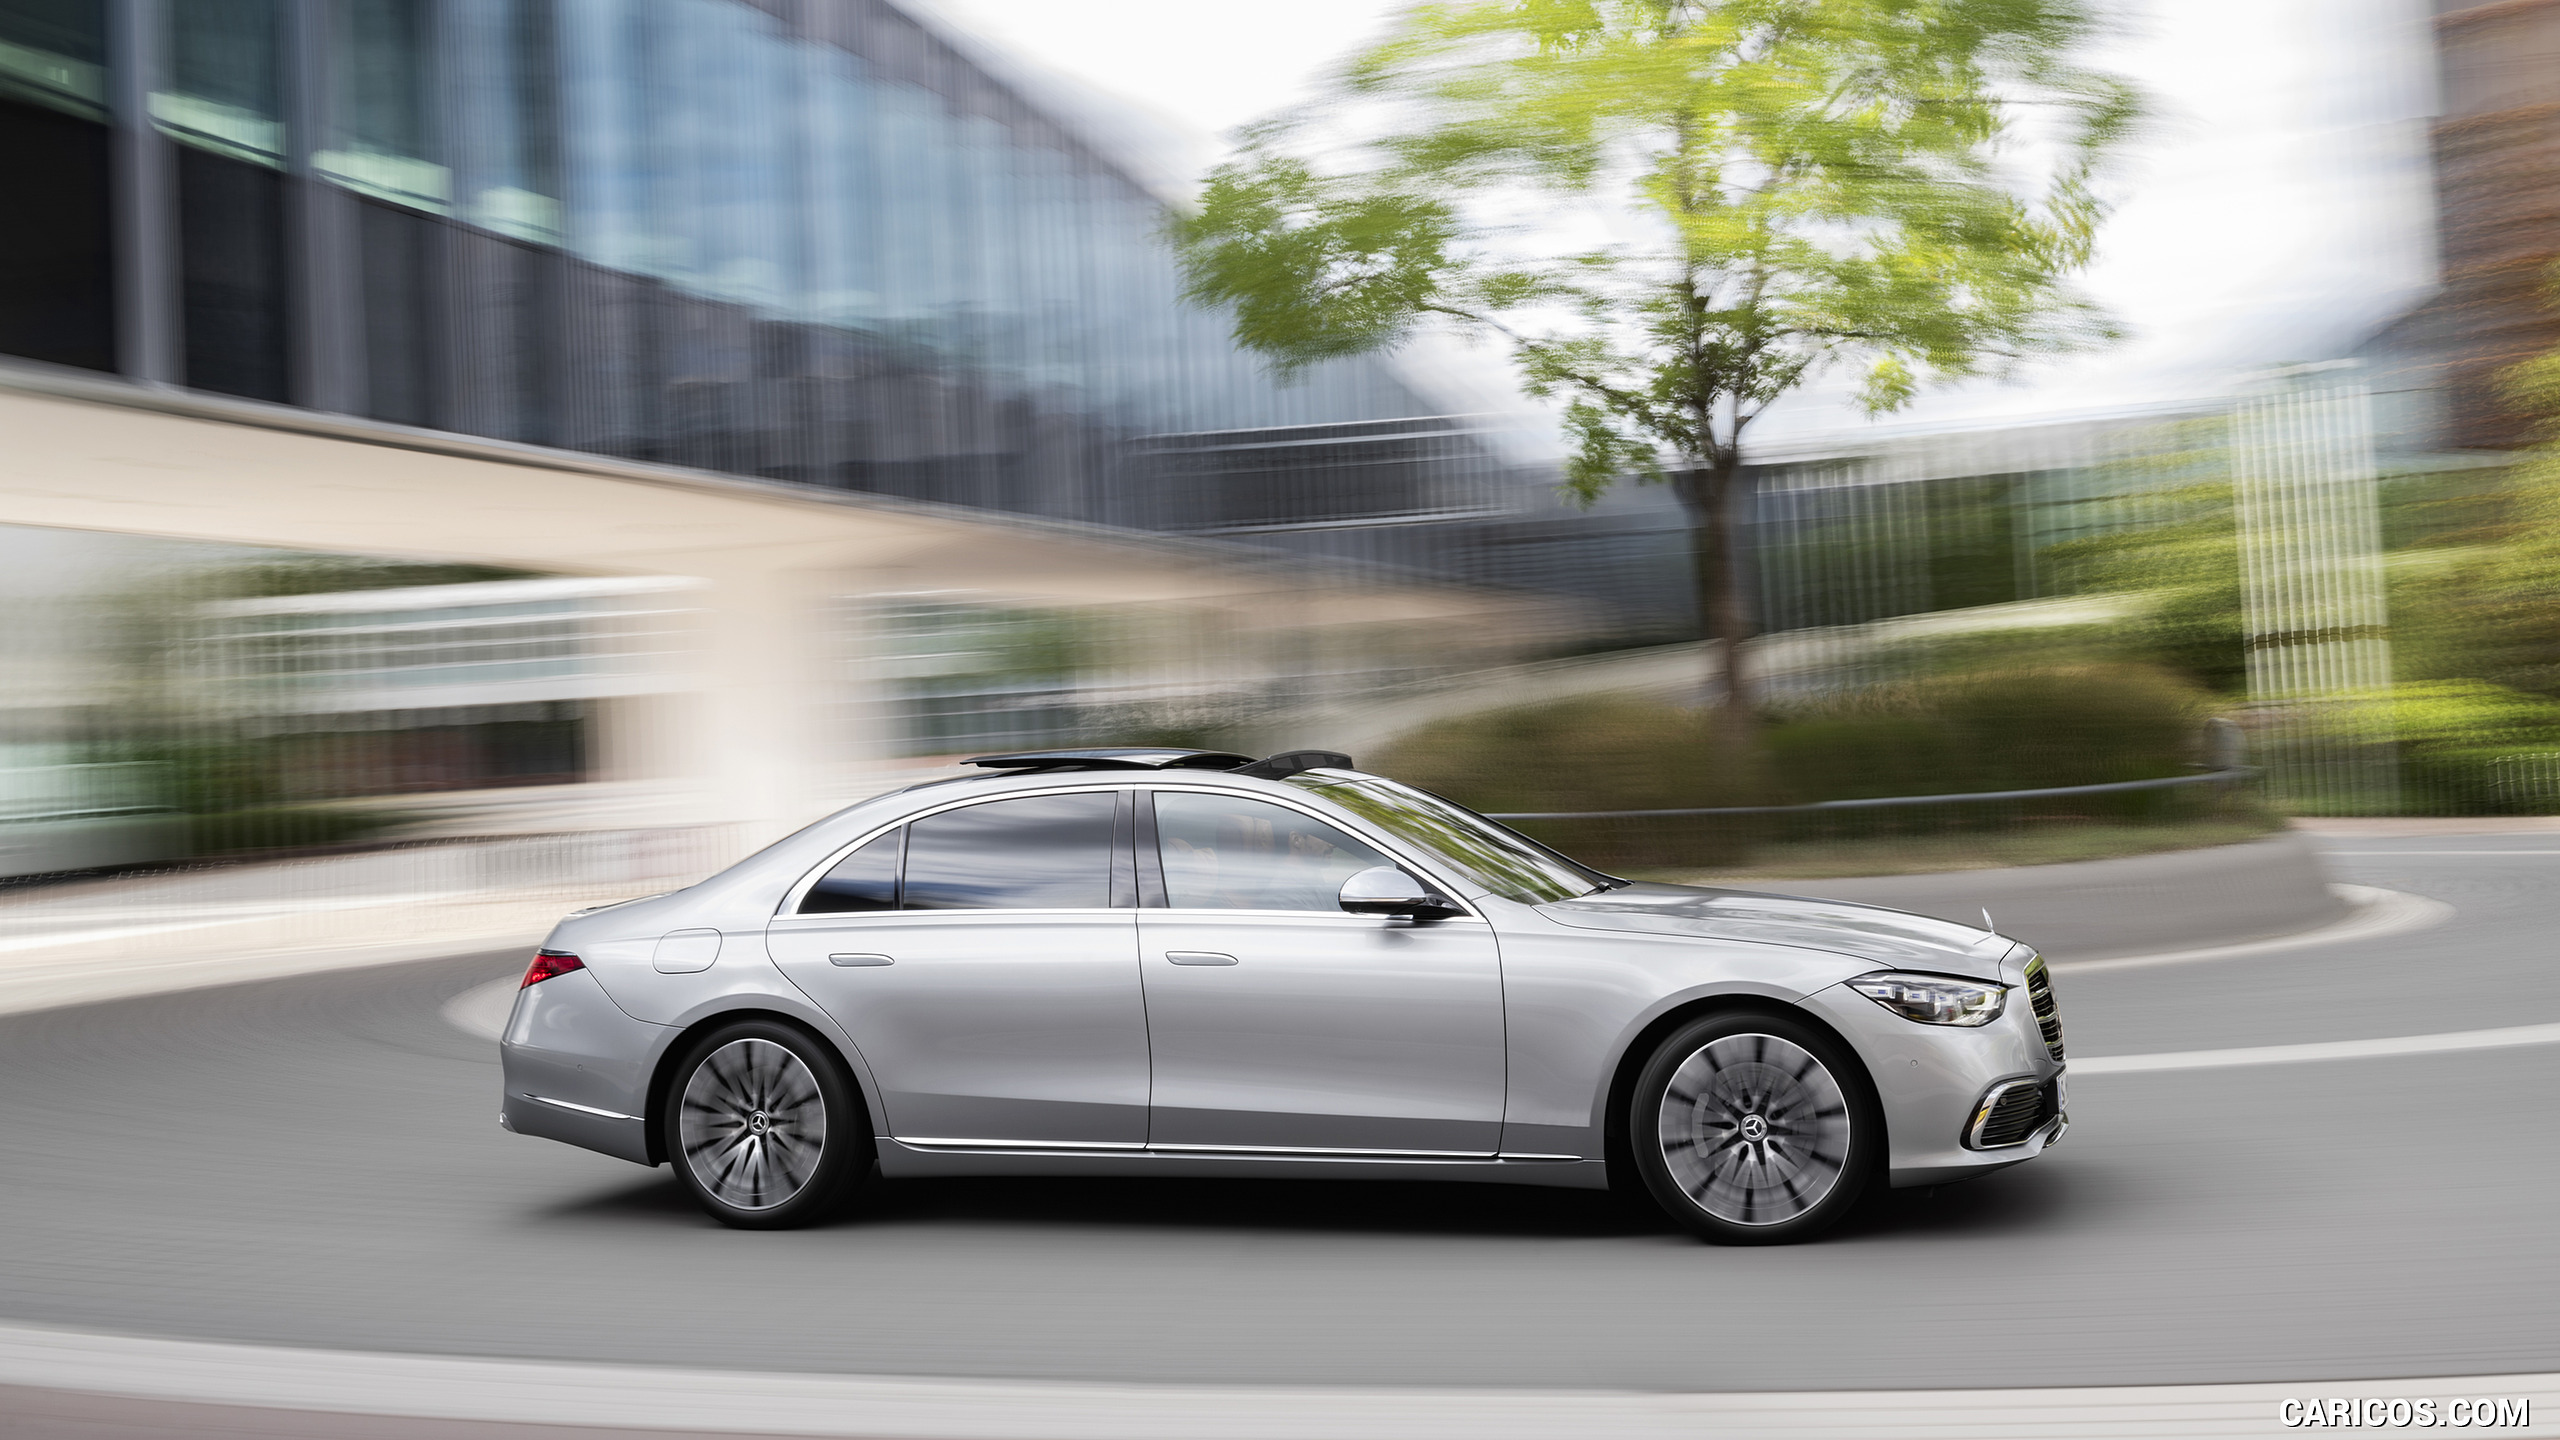 2021 Mercedes-Benz S-Class (Color: High-tech Silver) - Side, #49 of 316